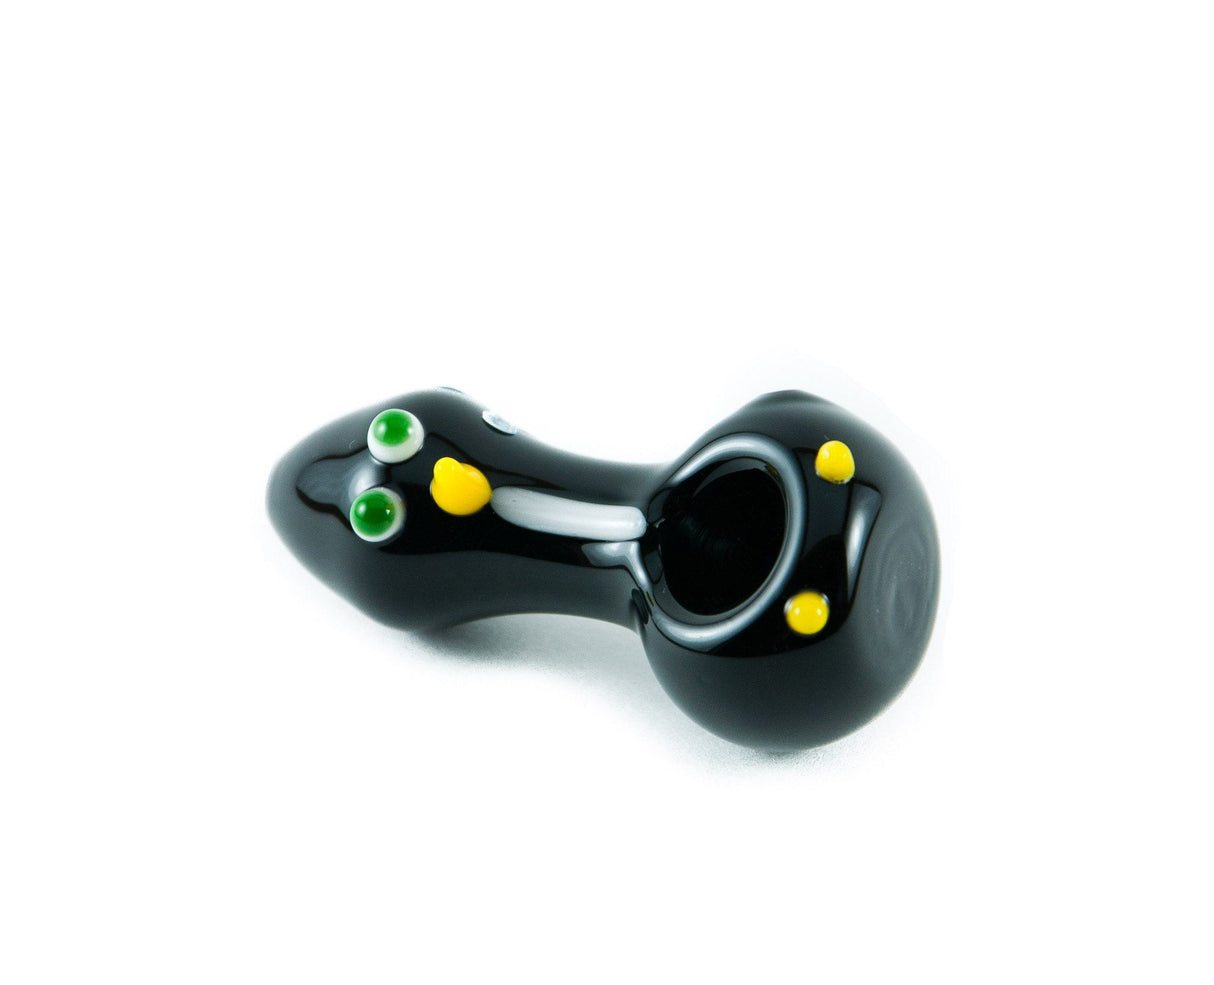 Chameleon Glass Chilly Willy hand pipe, USA-made borosilicate glass, front view on white background